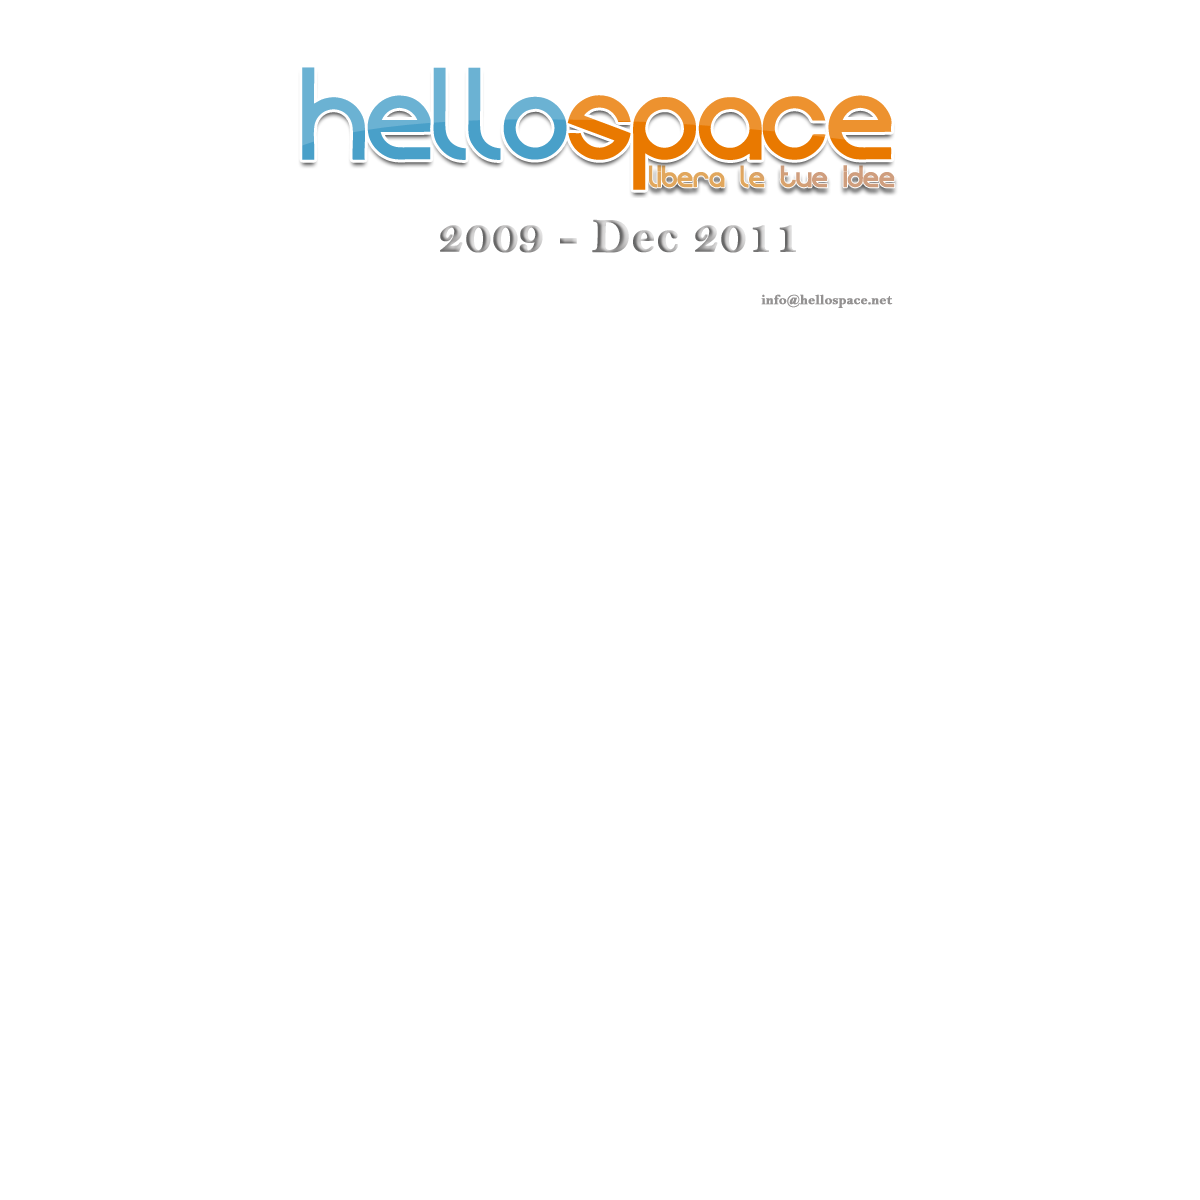 A complete backup of hellospace.net